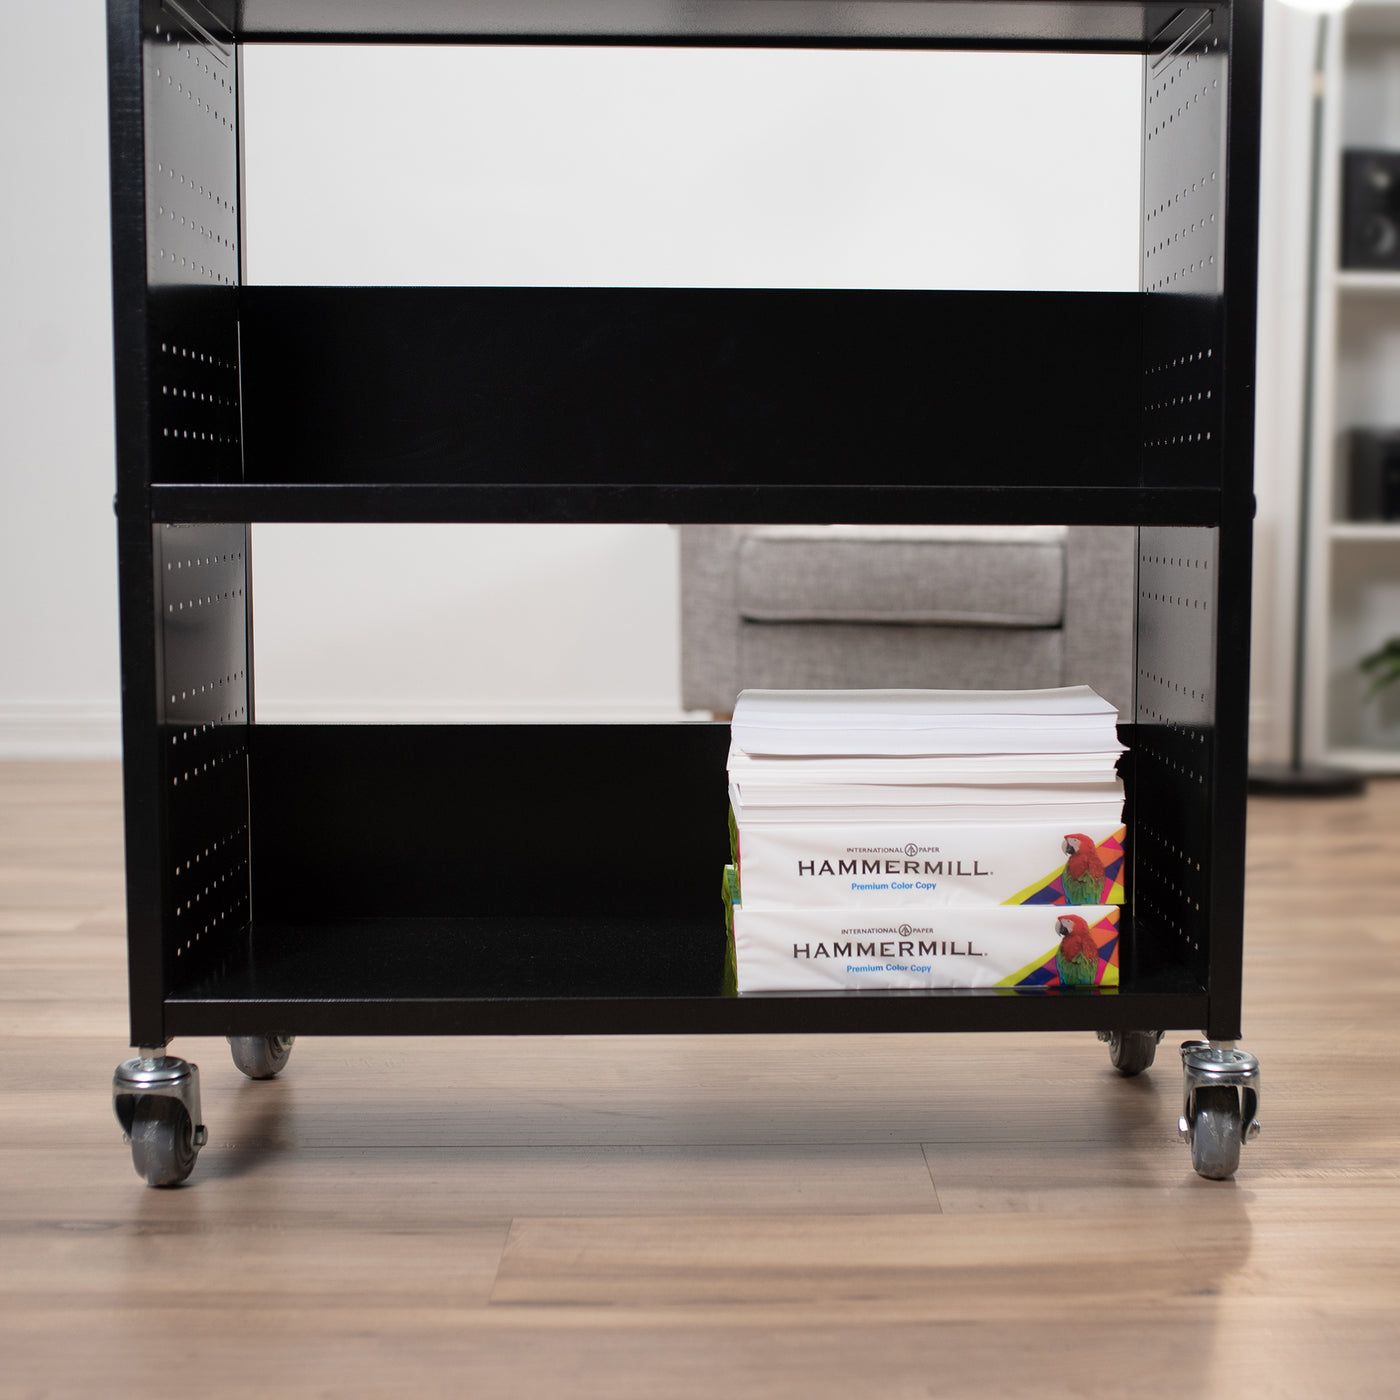 Heavy-duty 3 shelf book cart with wheels for library, school, bookstore.